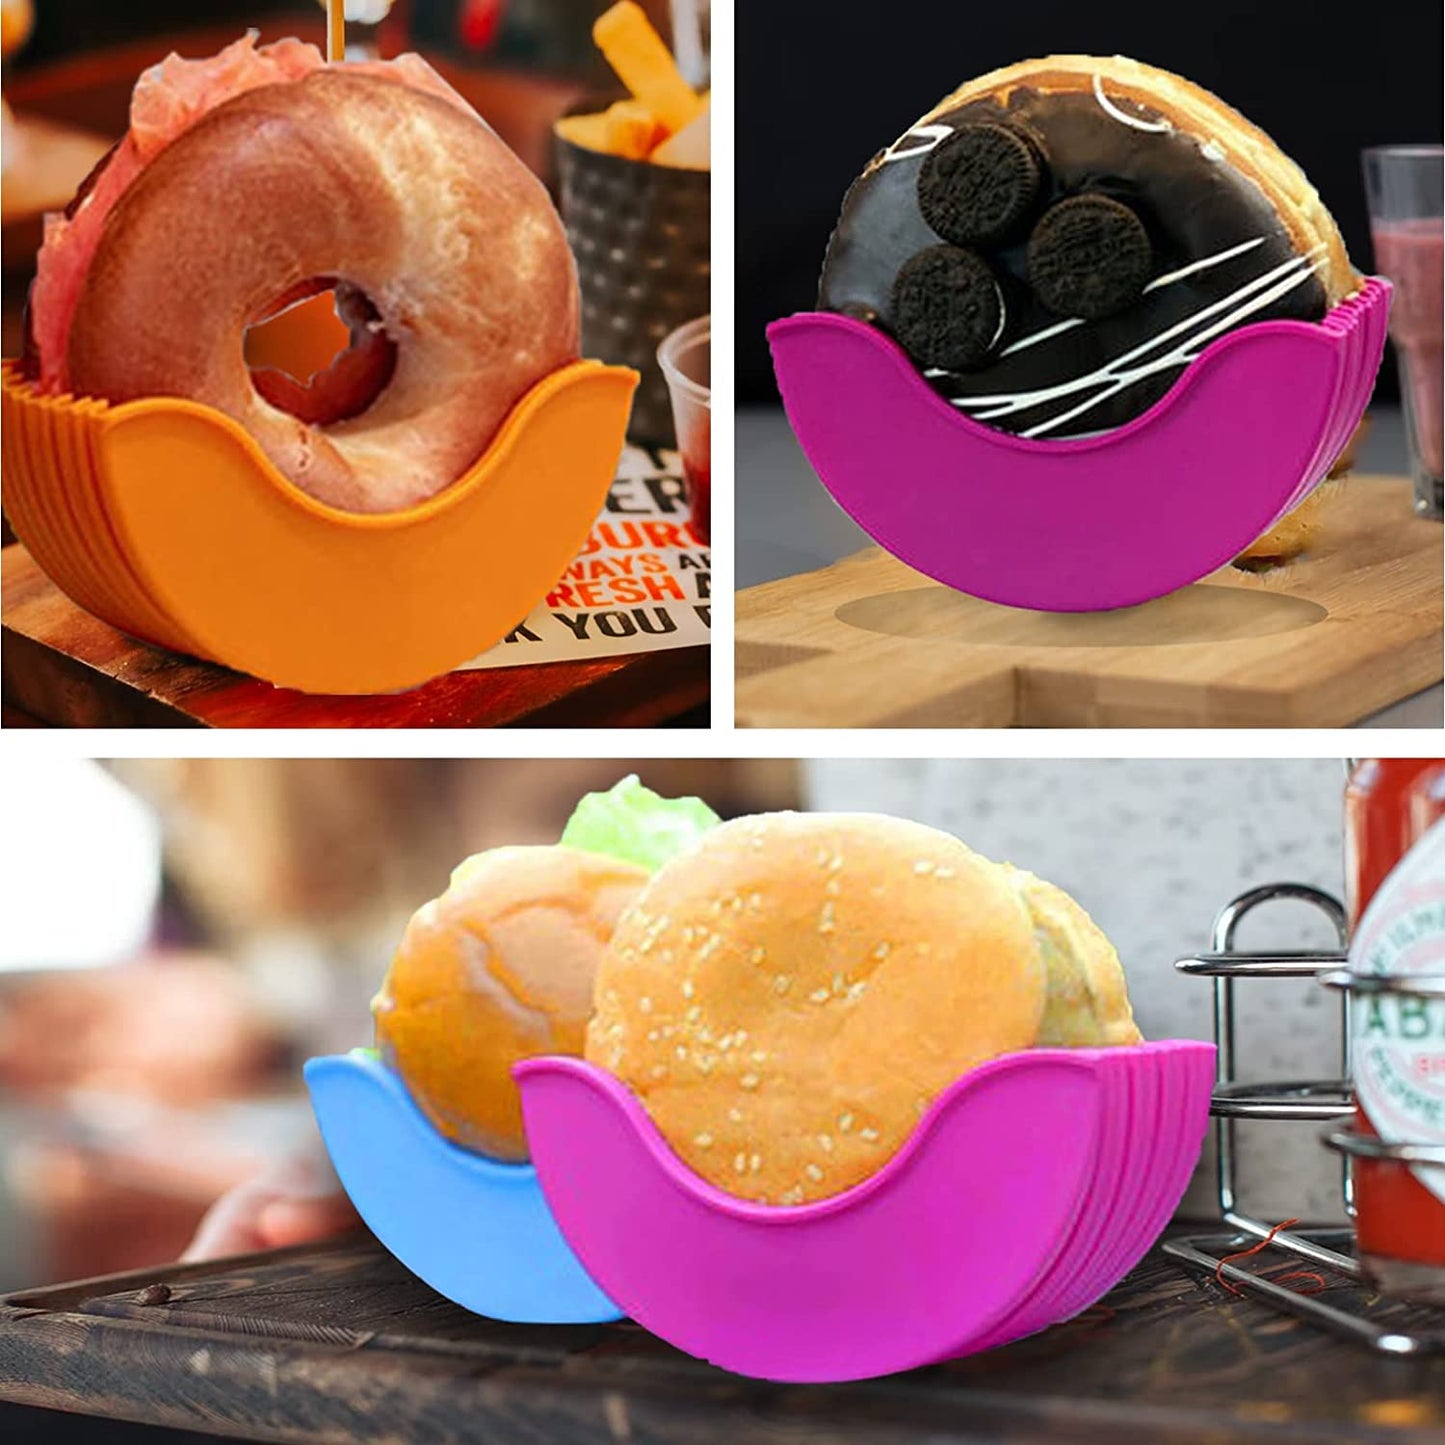 A bagel, donut and burger each in a hamburger holder which is a gadget to ensure mess free burger eating.